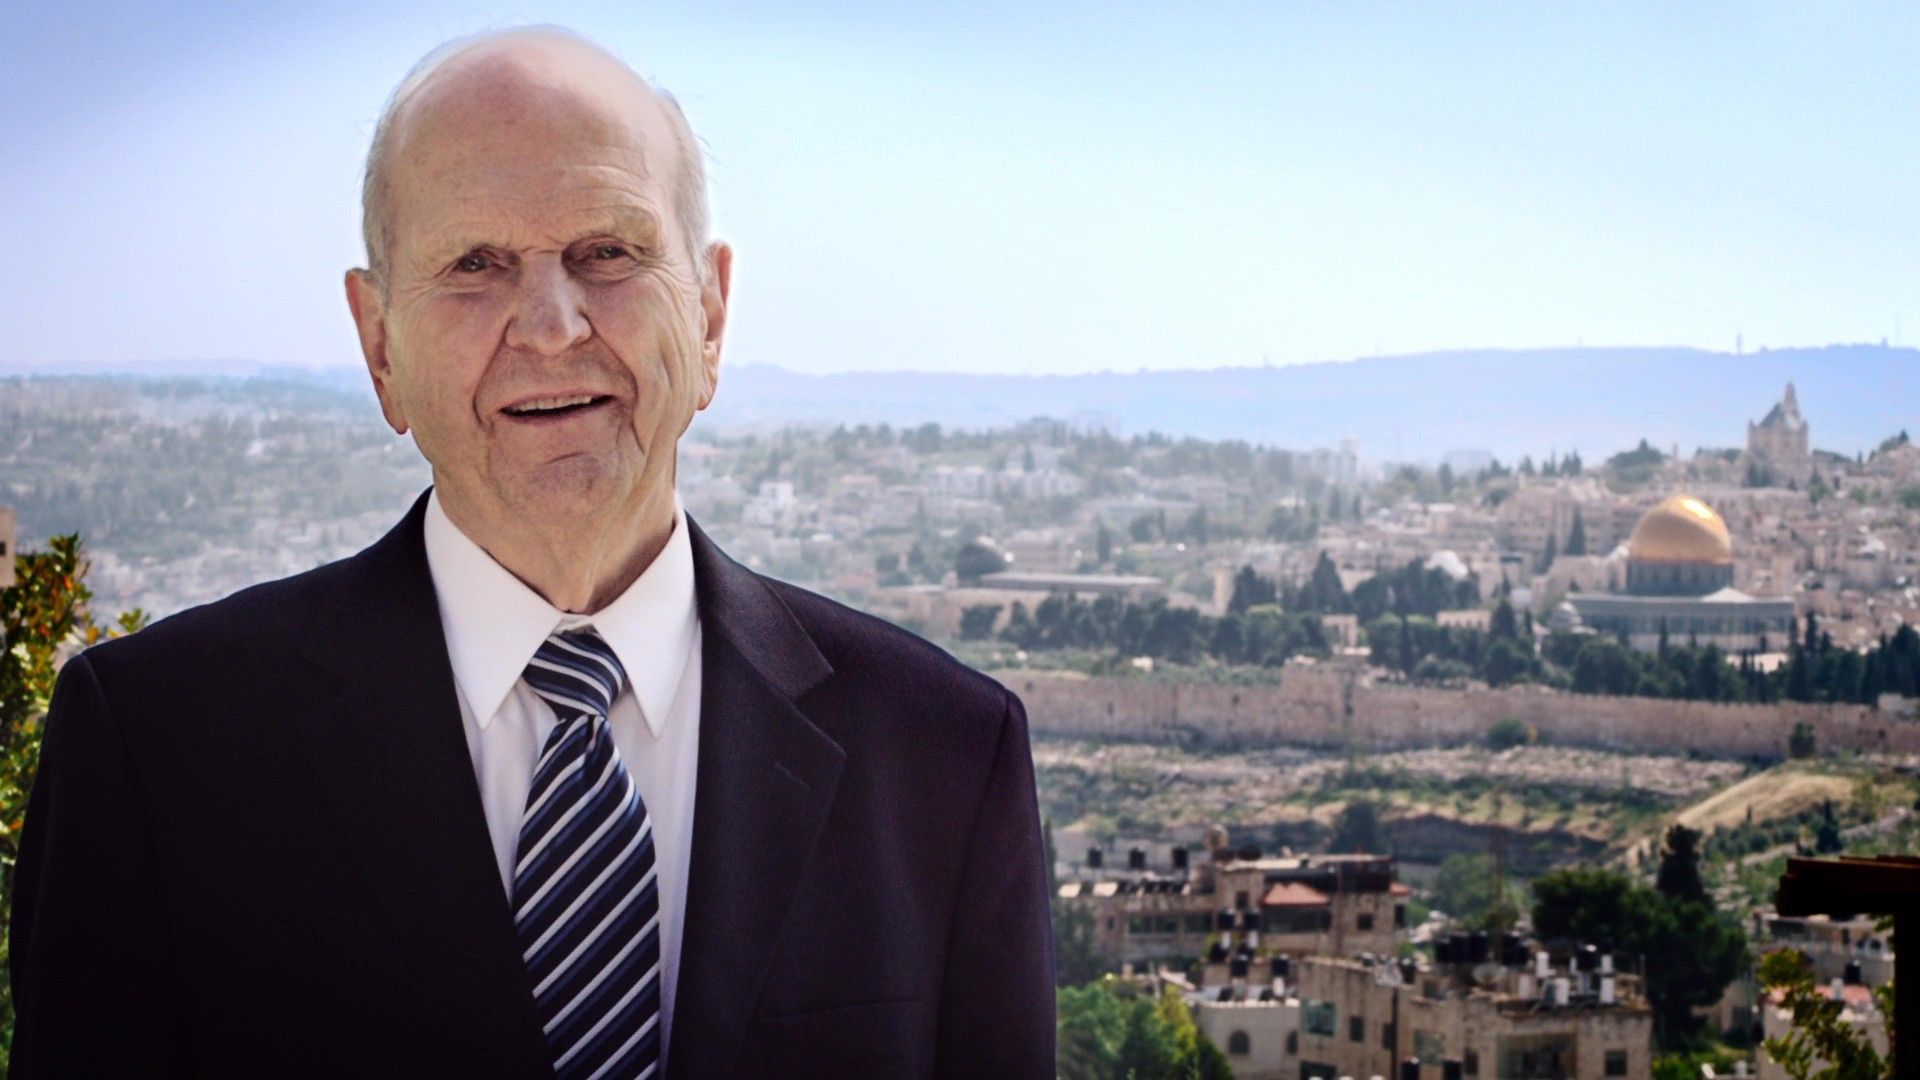 President Russell M. Nelson shares his testimony of the reality of Jesus Christ and the power of His Atonement.